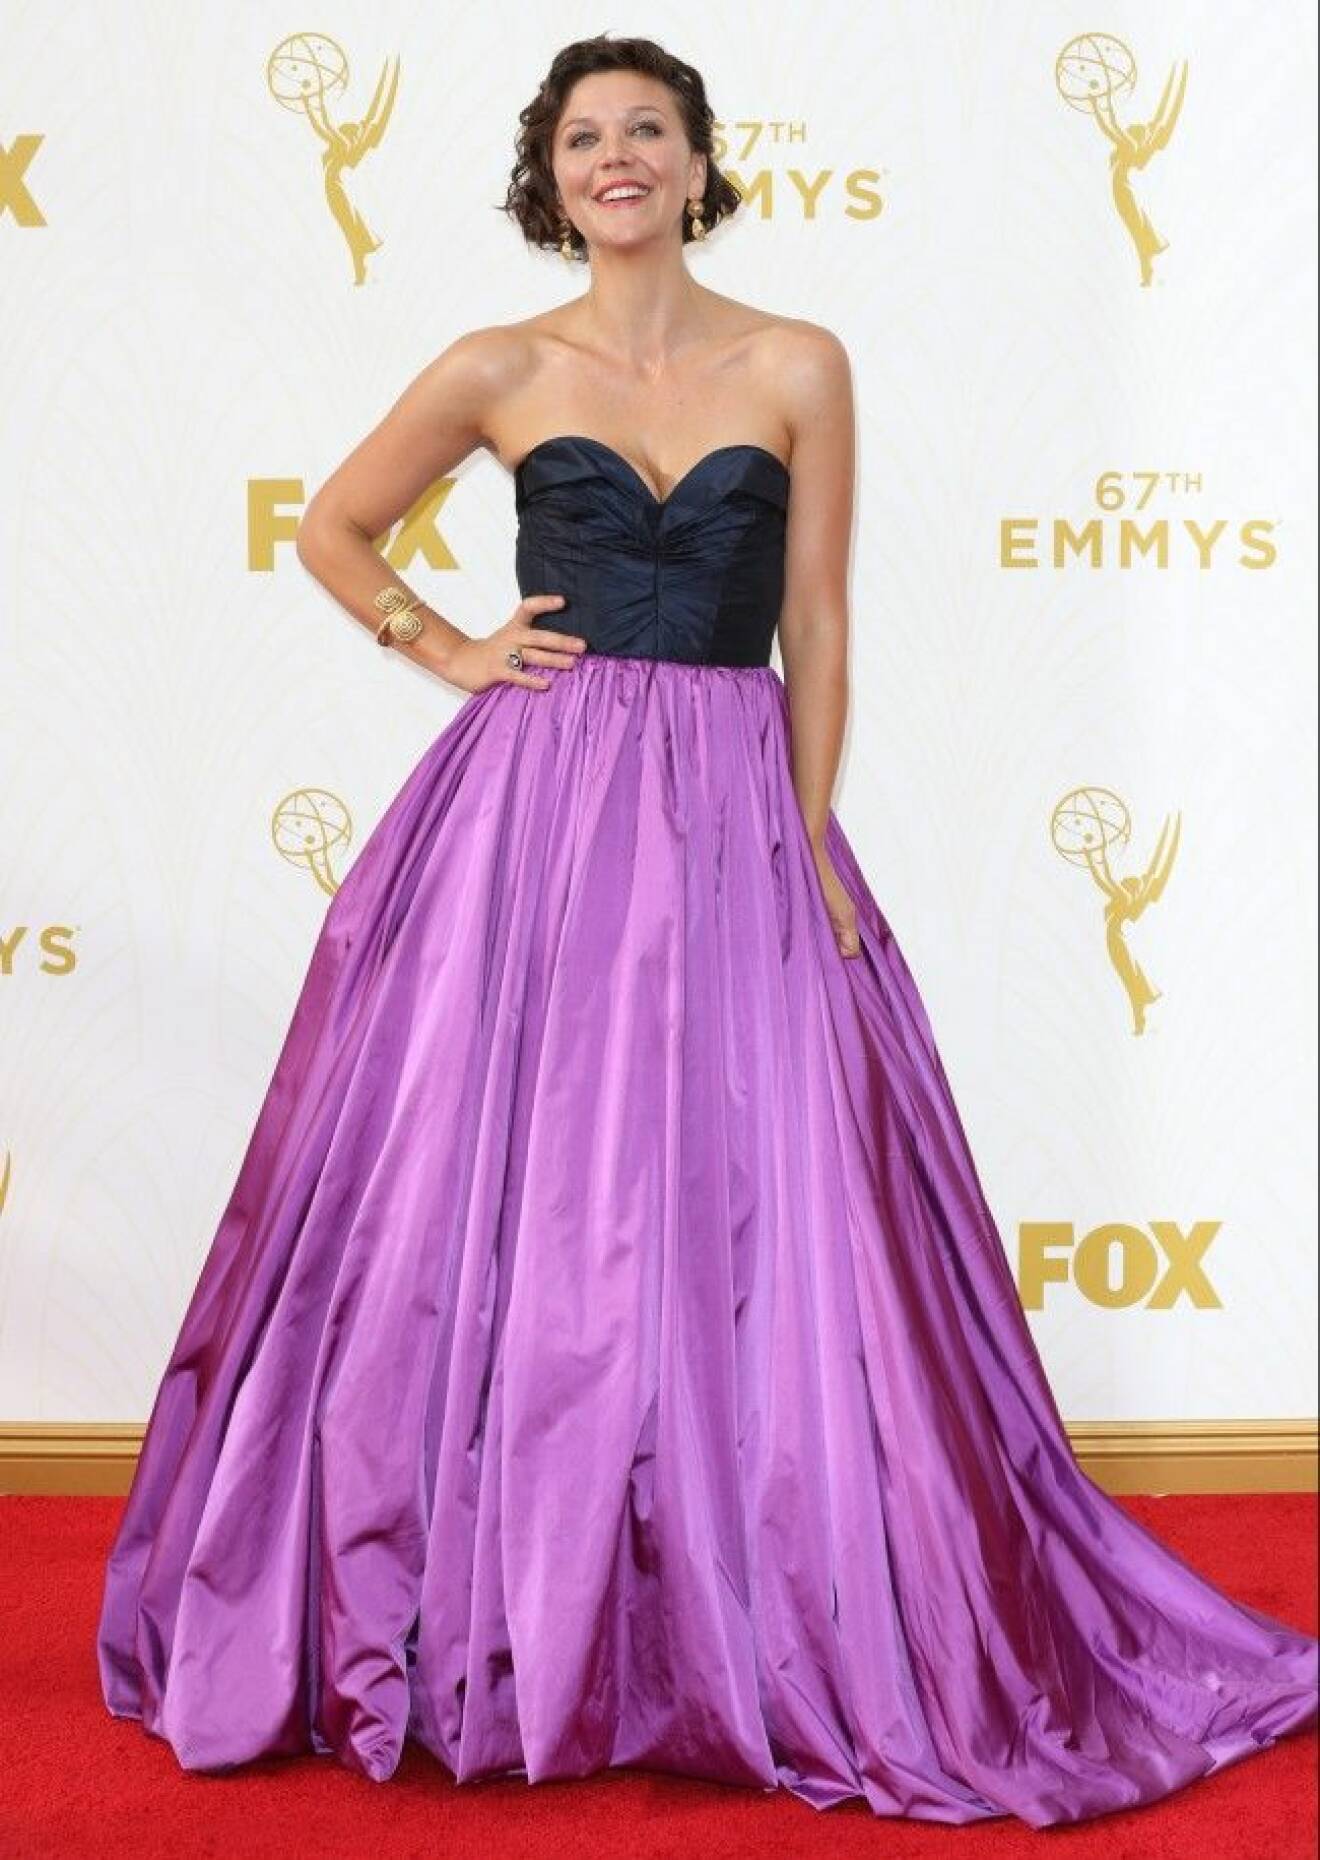 67th Annual Primetime Emmy Awards at Microsoft Theater - Red Carpet Arrivals Featuring: Maggie Gyllenhaal Where: Los Angeles, California, United States When: 20 Sep 2015 Credit: Brian To/WENN.com